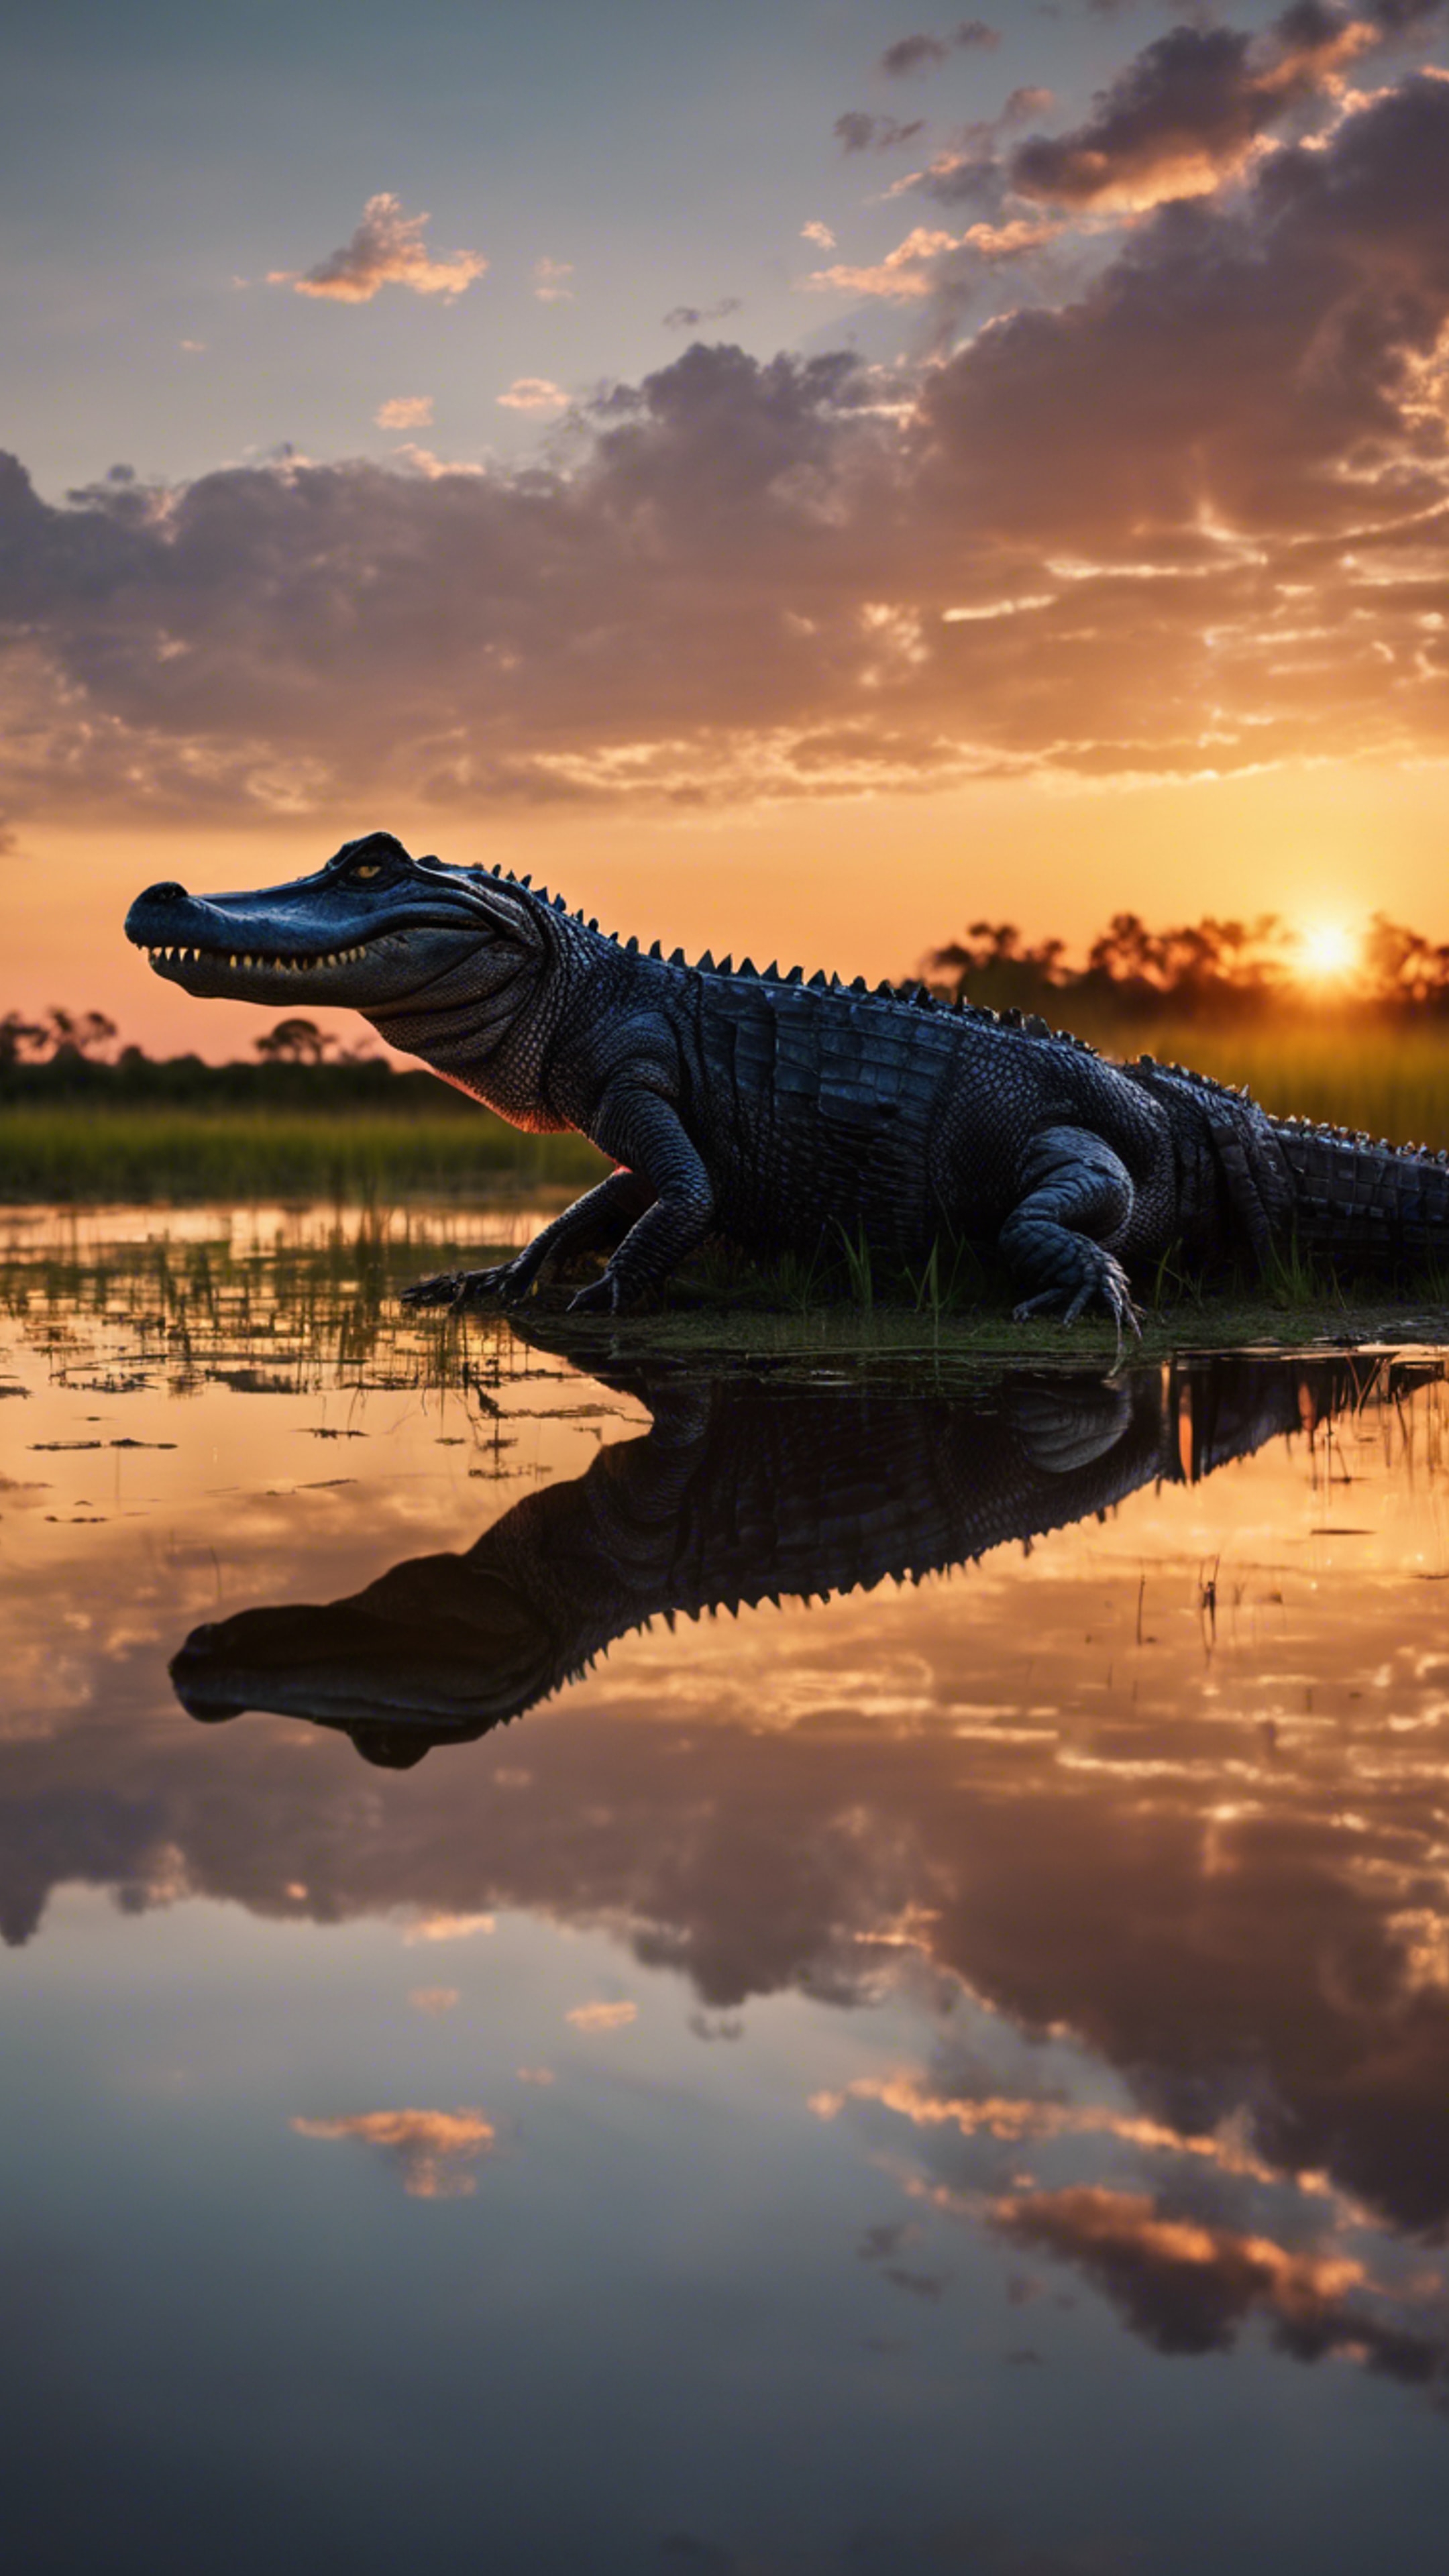 A vibrant sunset over the Florida Everglades, with a silhouette of an alligator in the foreground.壁紙[9ceb078963ba4bf483cc]